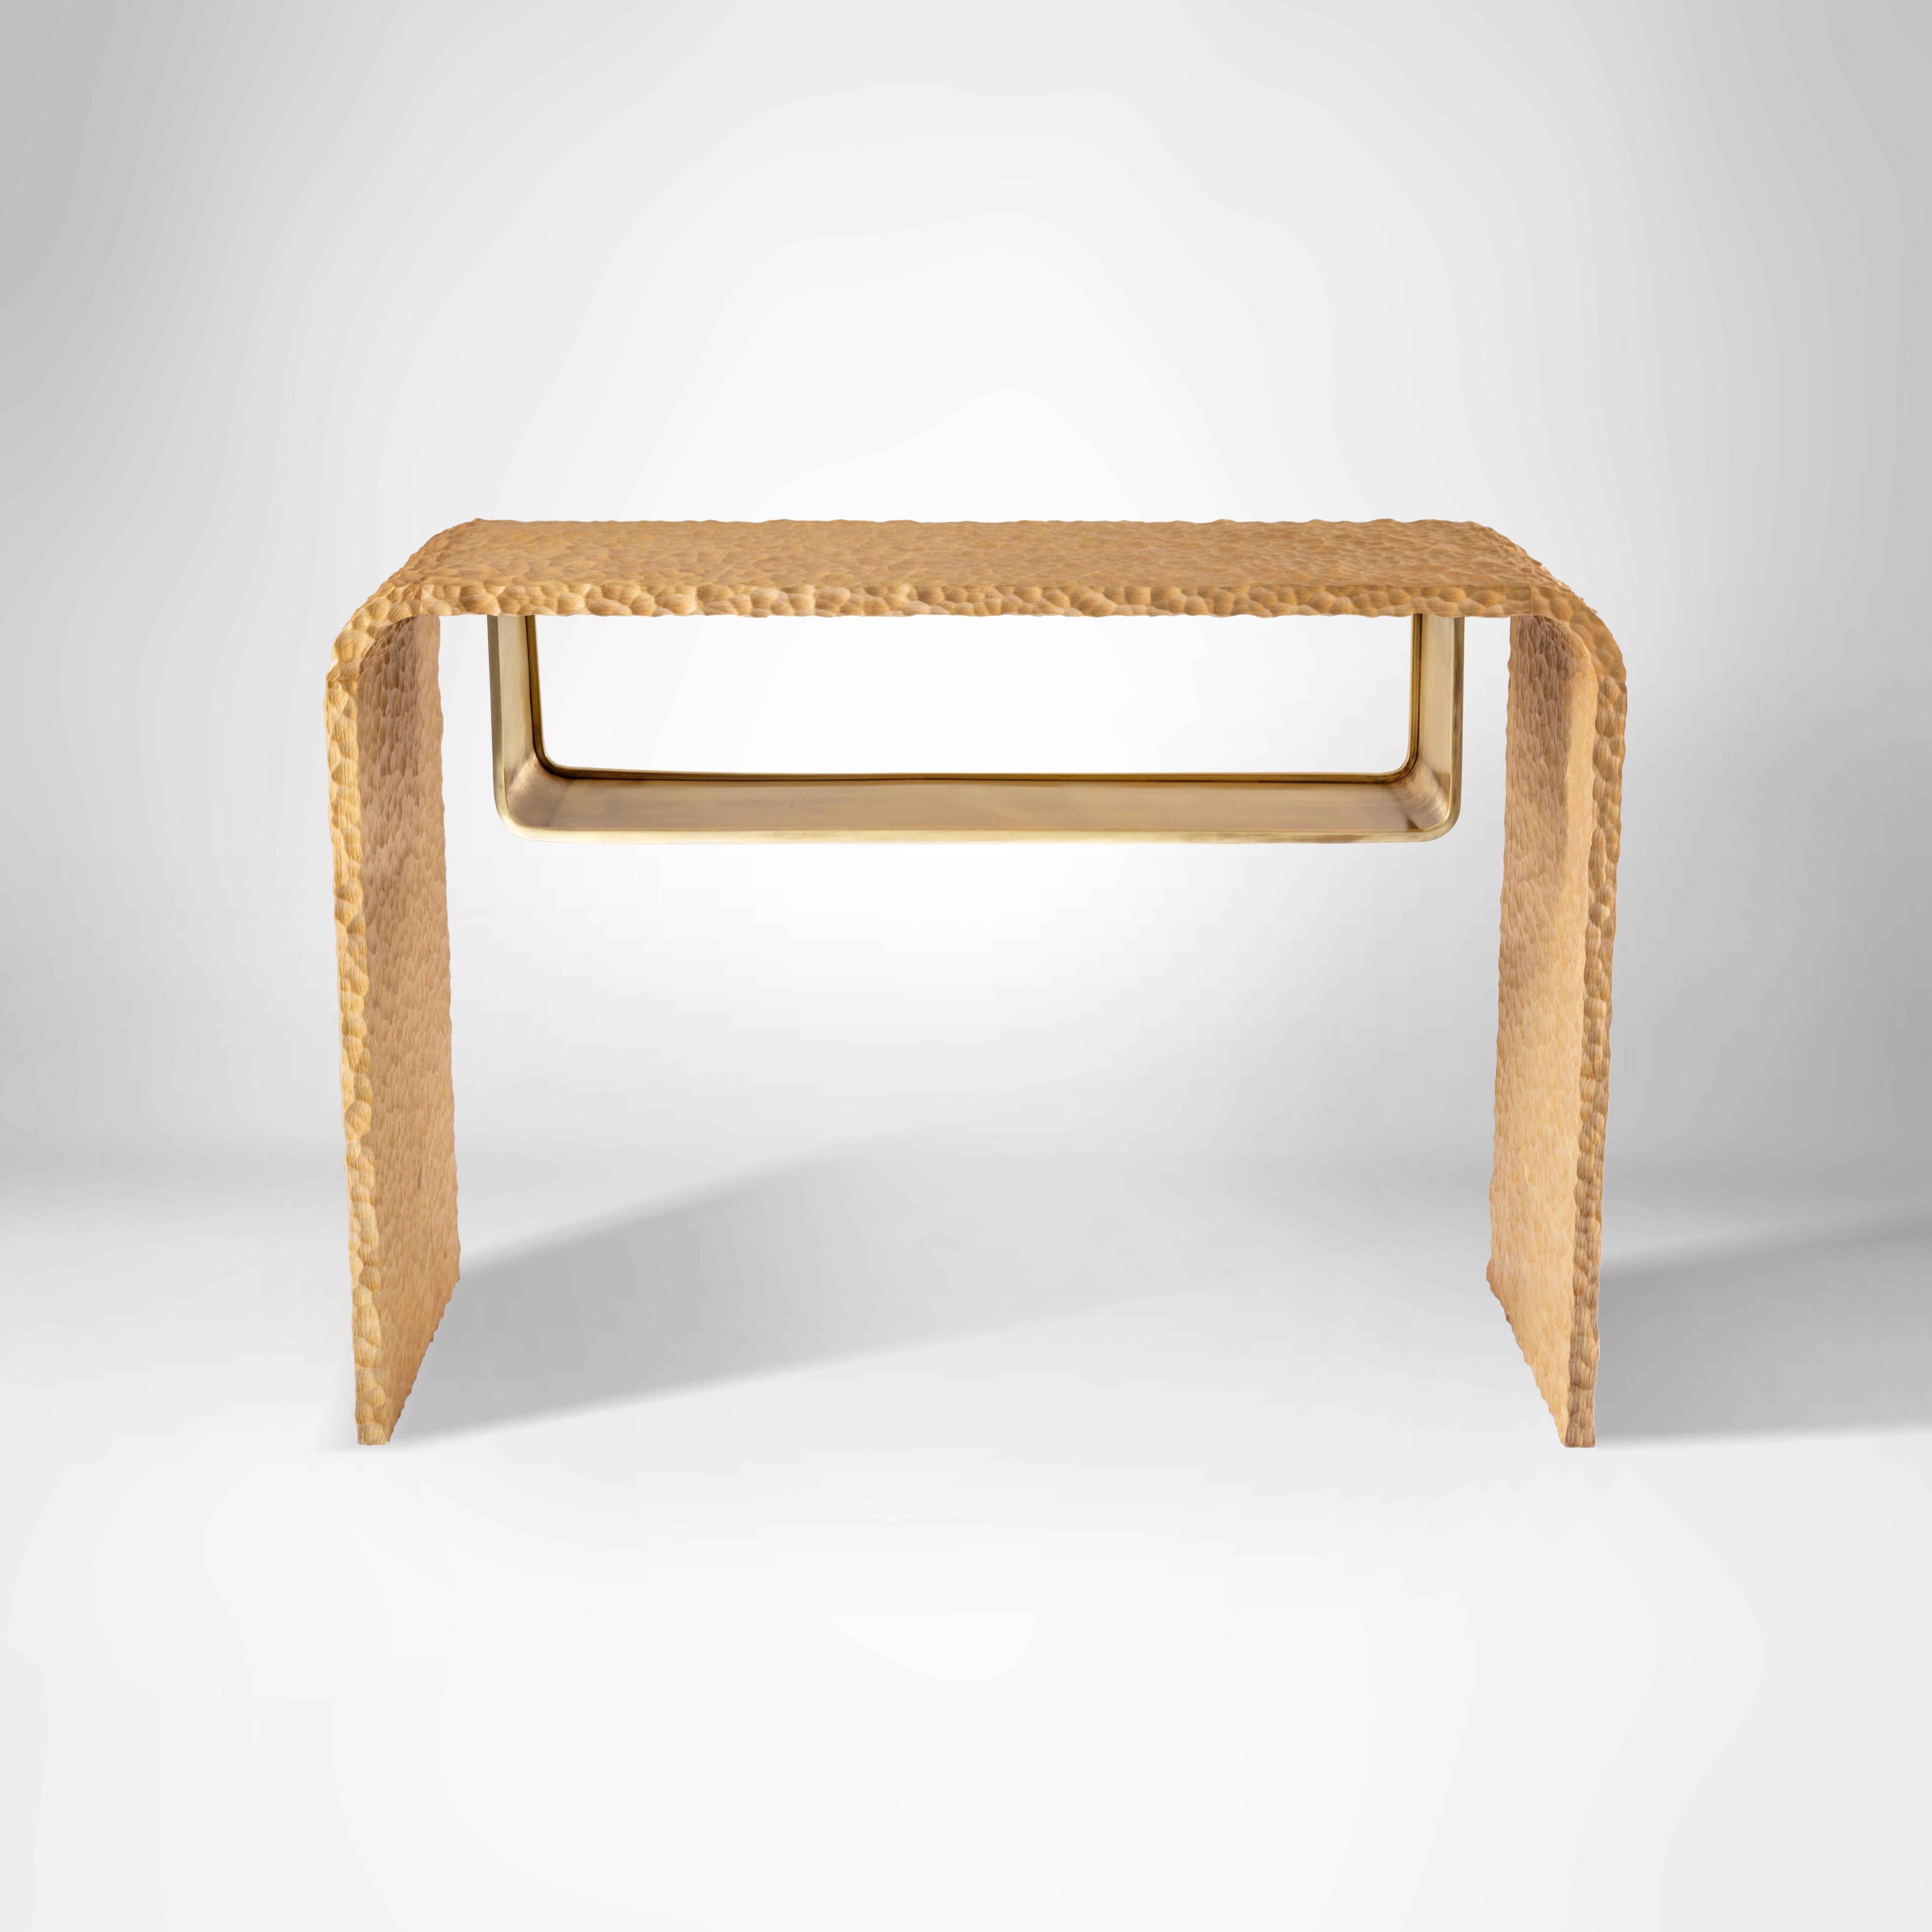 Organically Hand-Carved Massive Oak Wood Console with Hanging Brass Shelf.
There’s beauty in matching the unexpected. With our Opposites Attract console we contrast smooth shiny brass against rocky hand-crafted Oak wood to create this magical